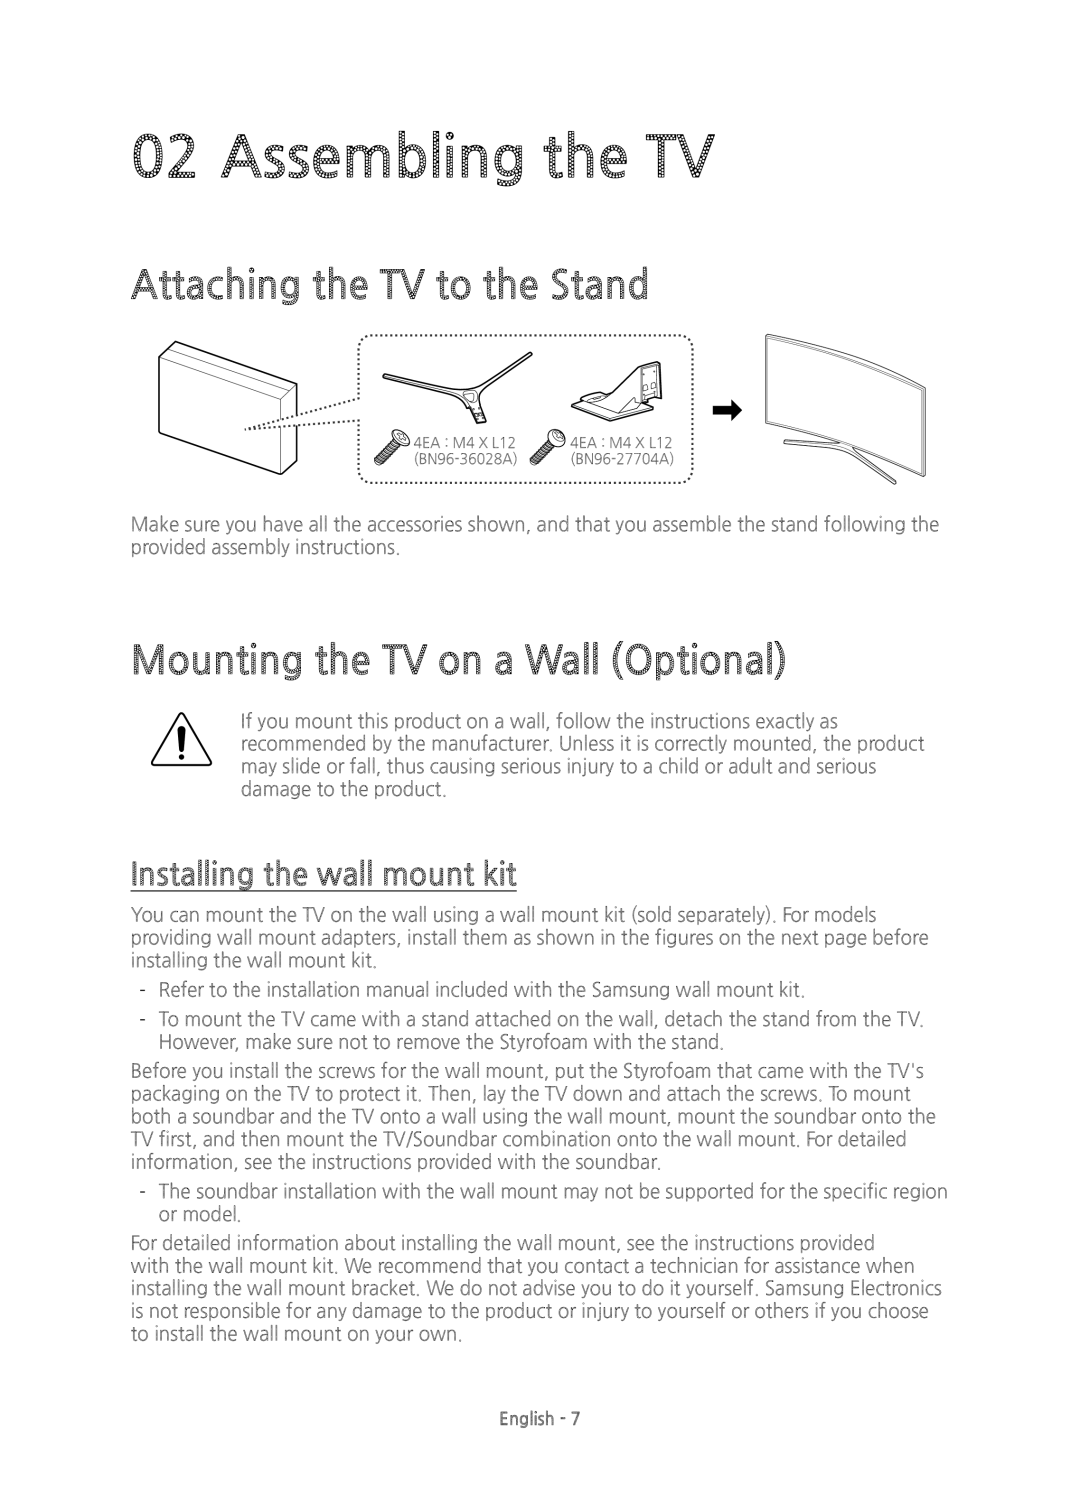 Samsung UE65JS9500TXXC manual Assembling the TV, Attaching the TV to the Stand, Mounting the TV on a Wall Optional 